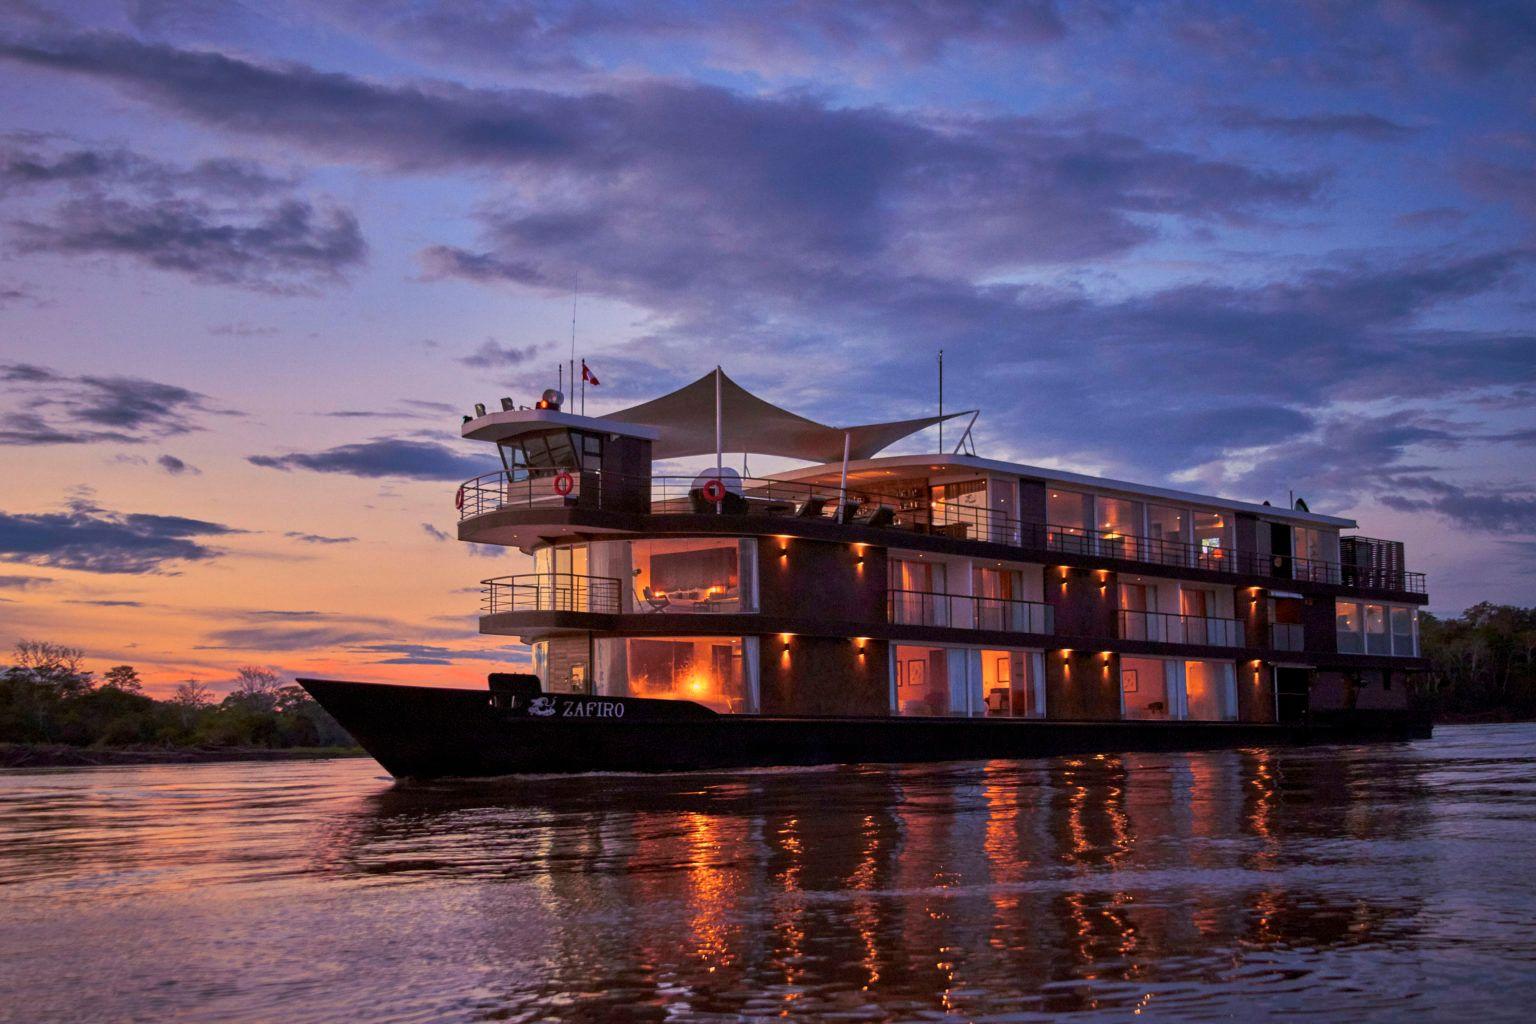 Witness spectacular sunsets in the heart of the Amazon, all while aboard your luxury Amazon cruise. Photo by Jungle Experiences